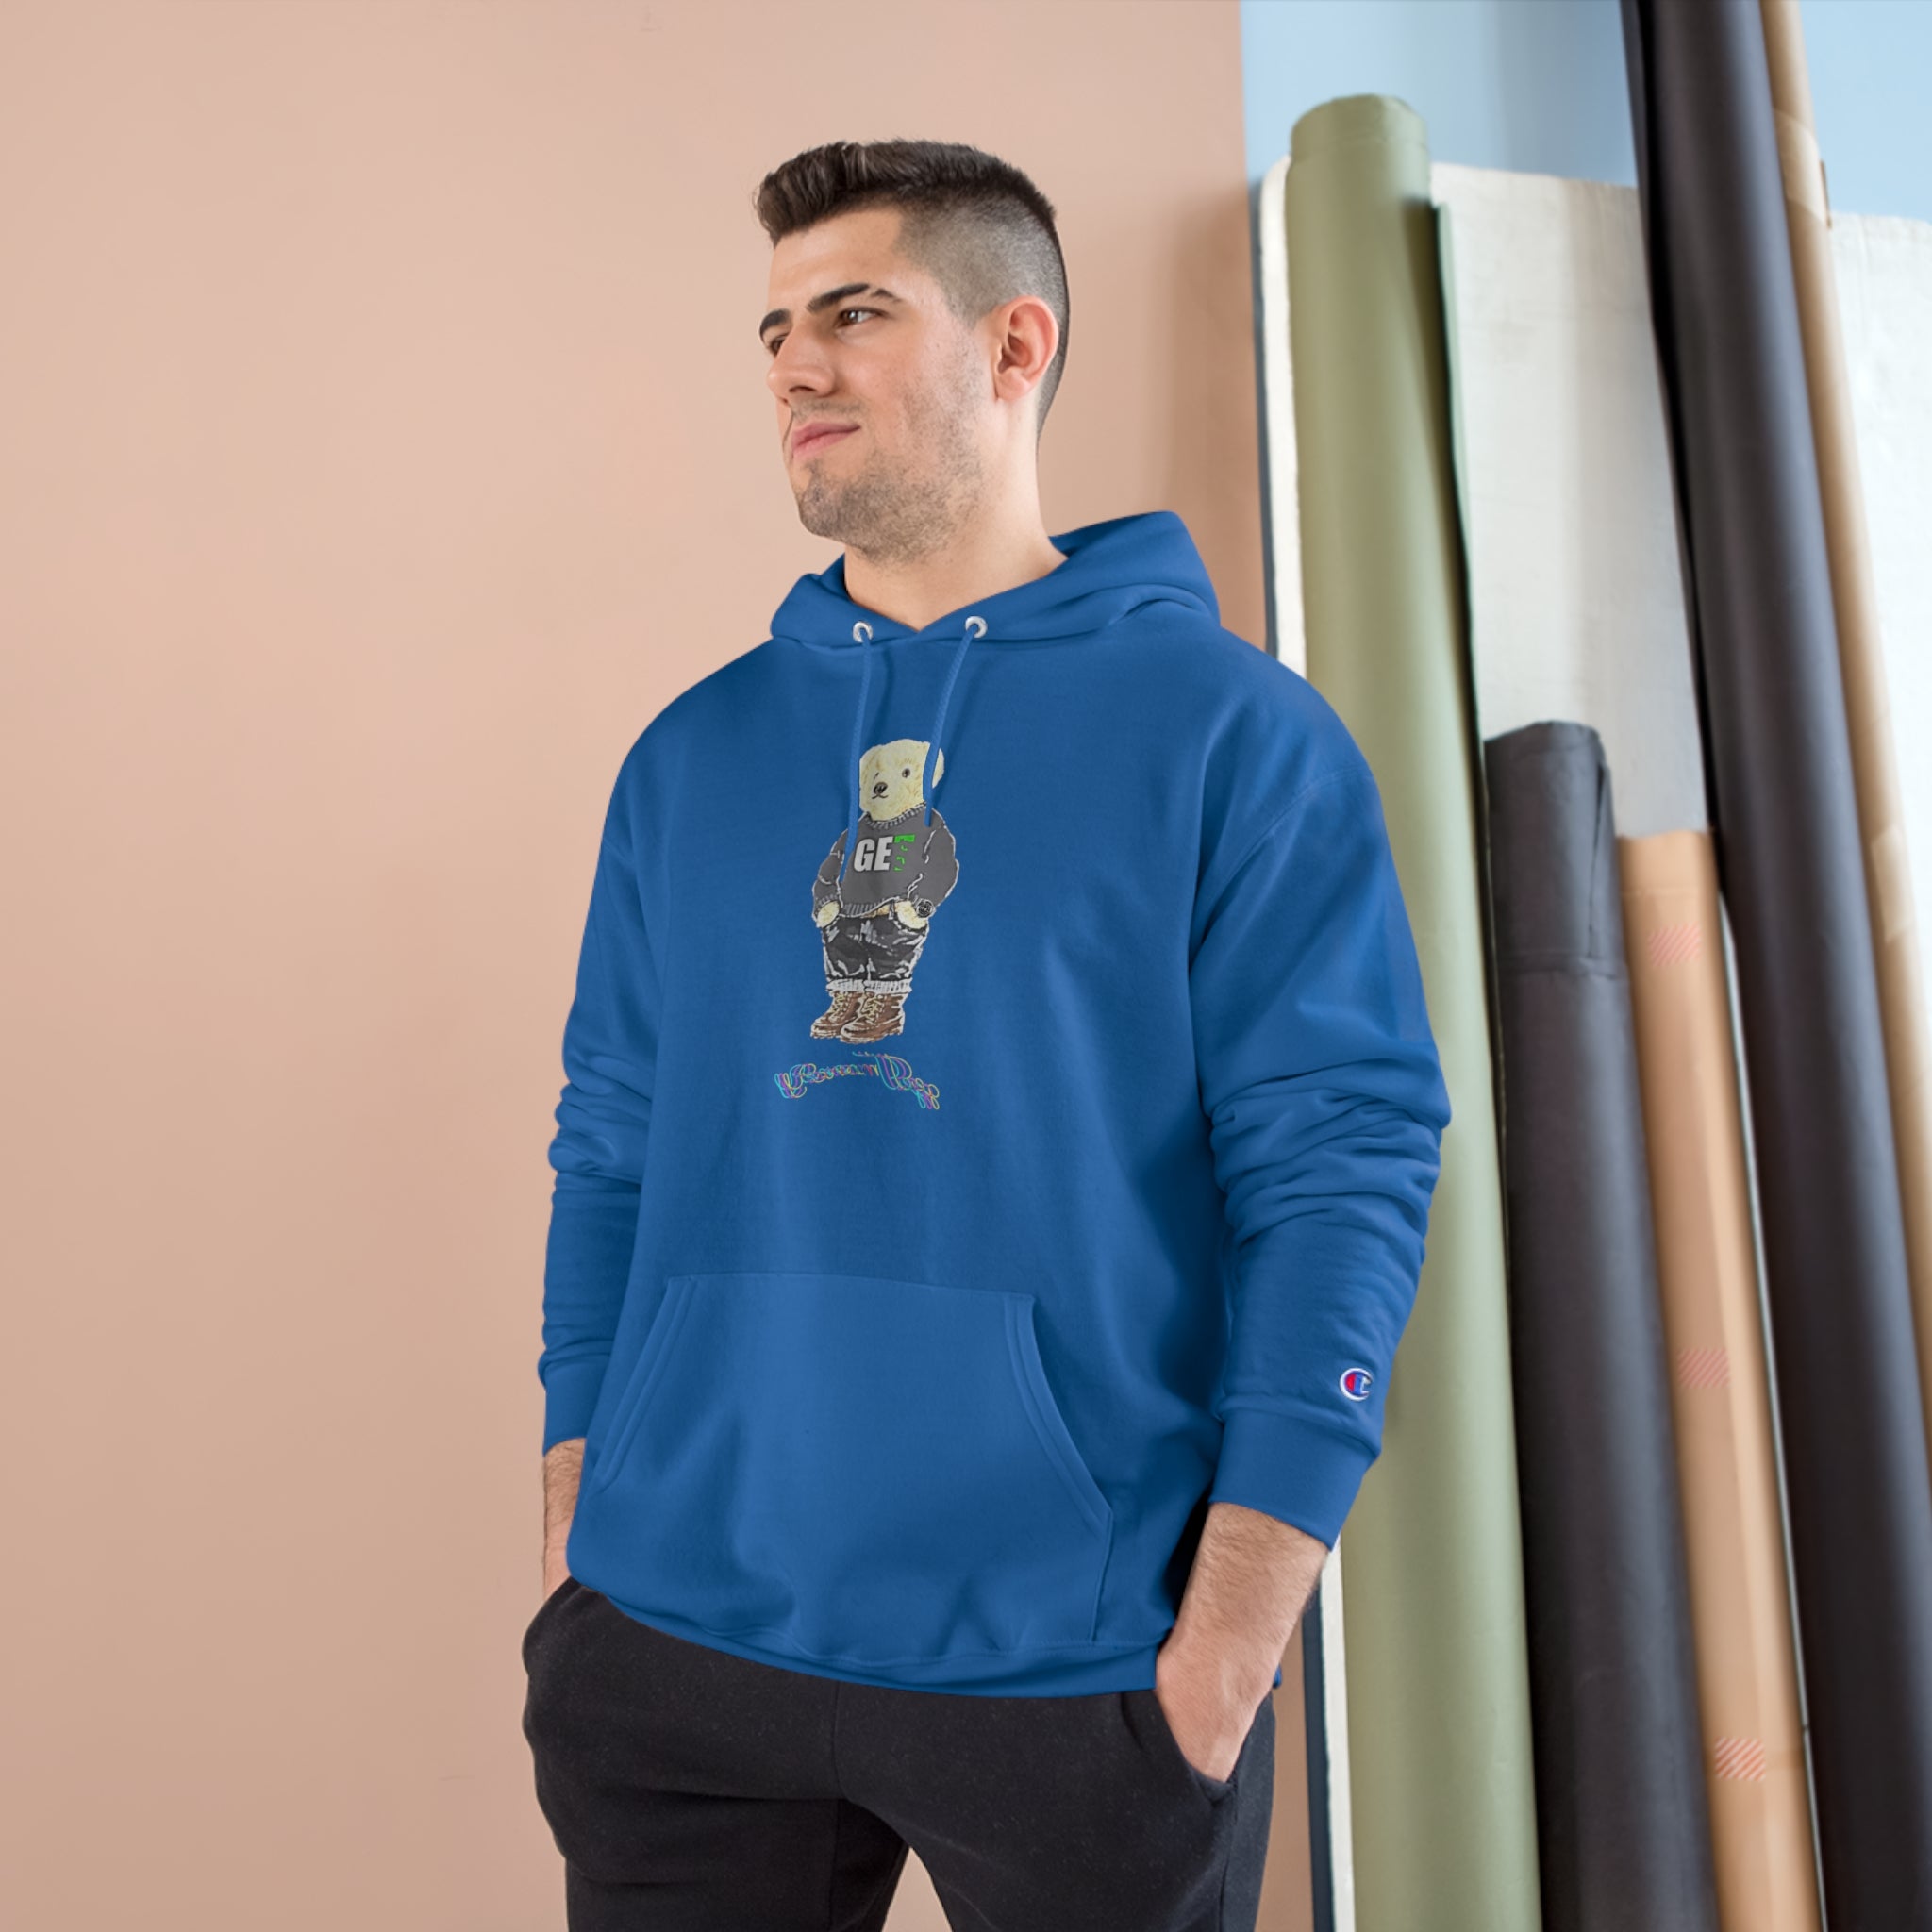 Grizzly Collab Champion Hoodie